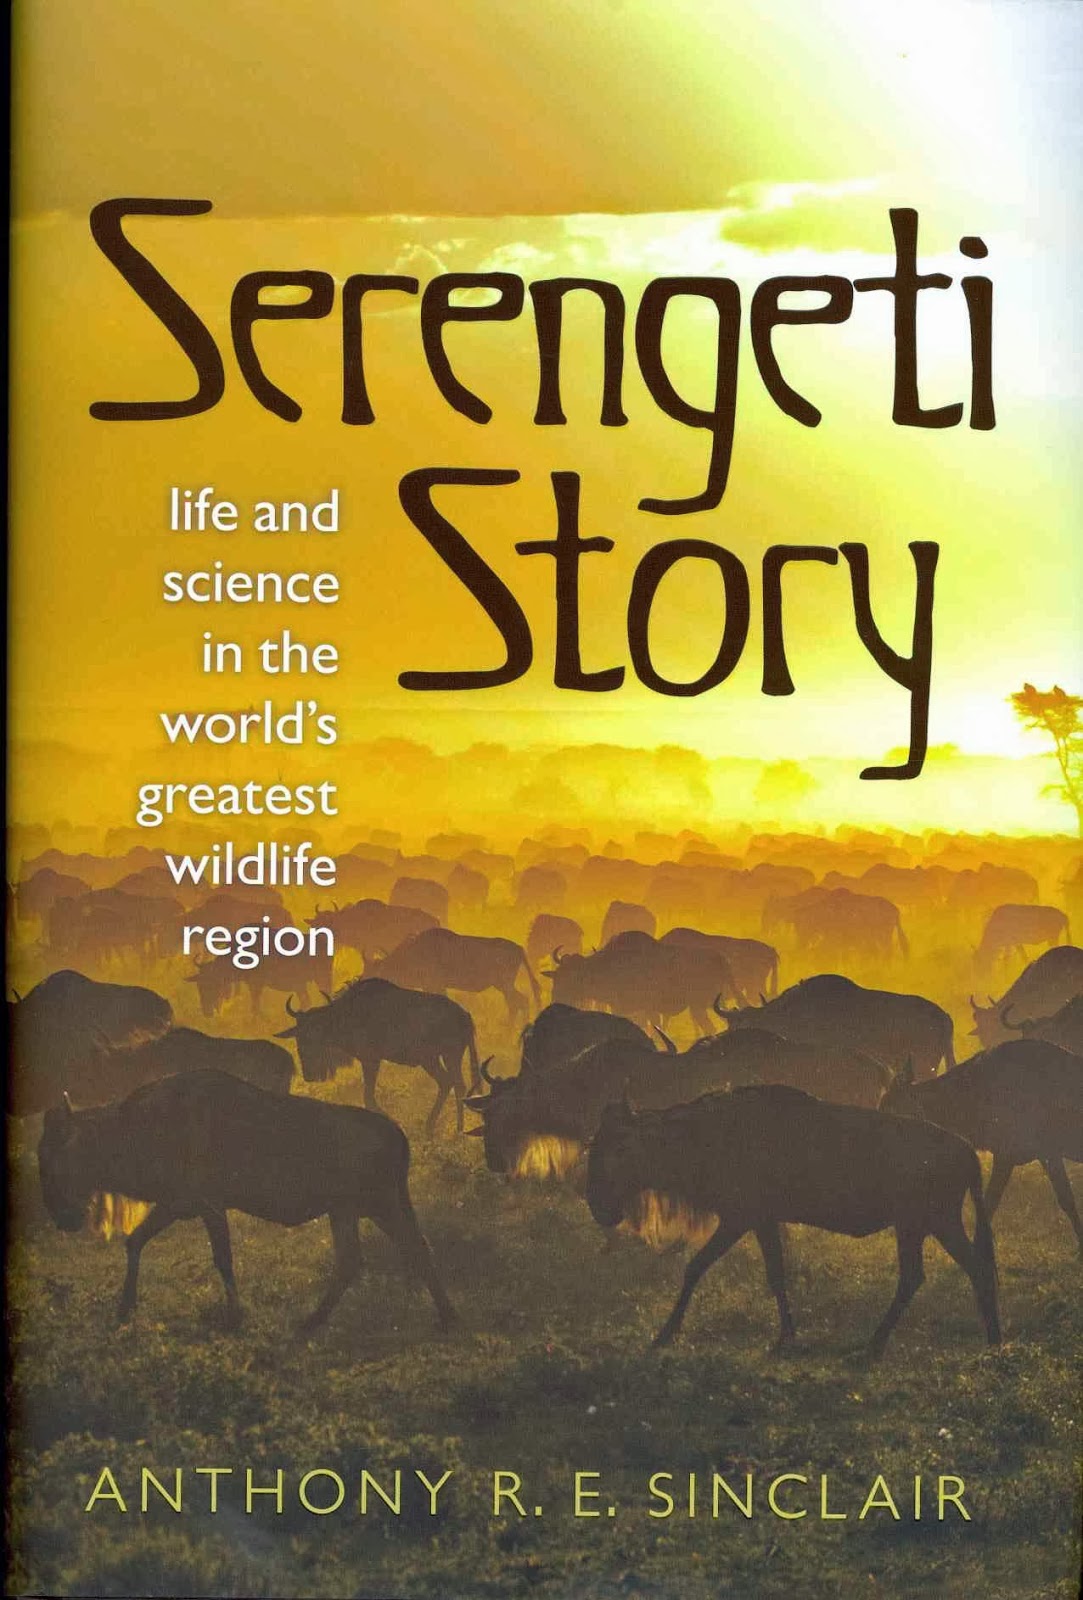 http://discover.halifaxpubliclibraries.ca/?q=title:serengeti%20story%20life%20and%20science